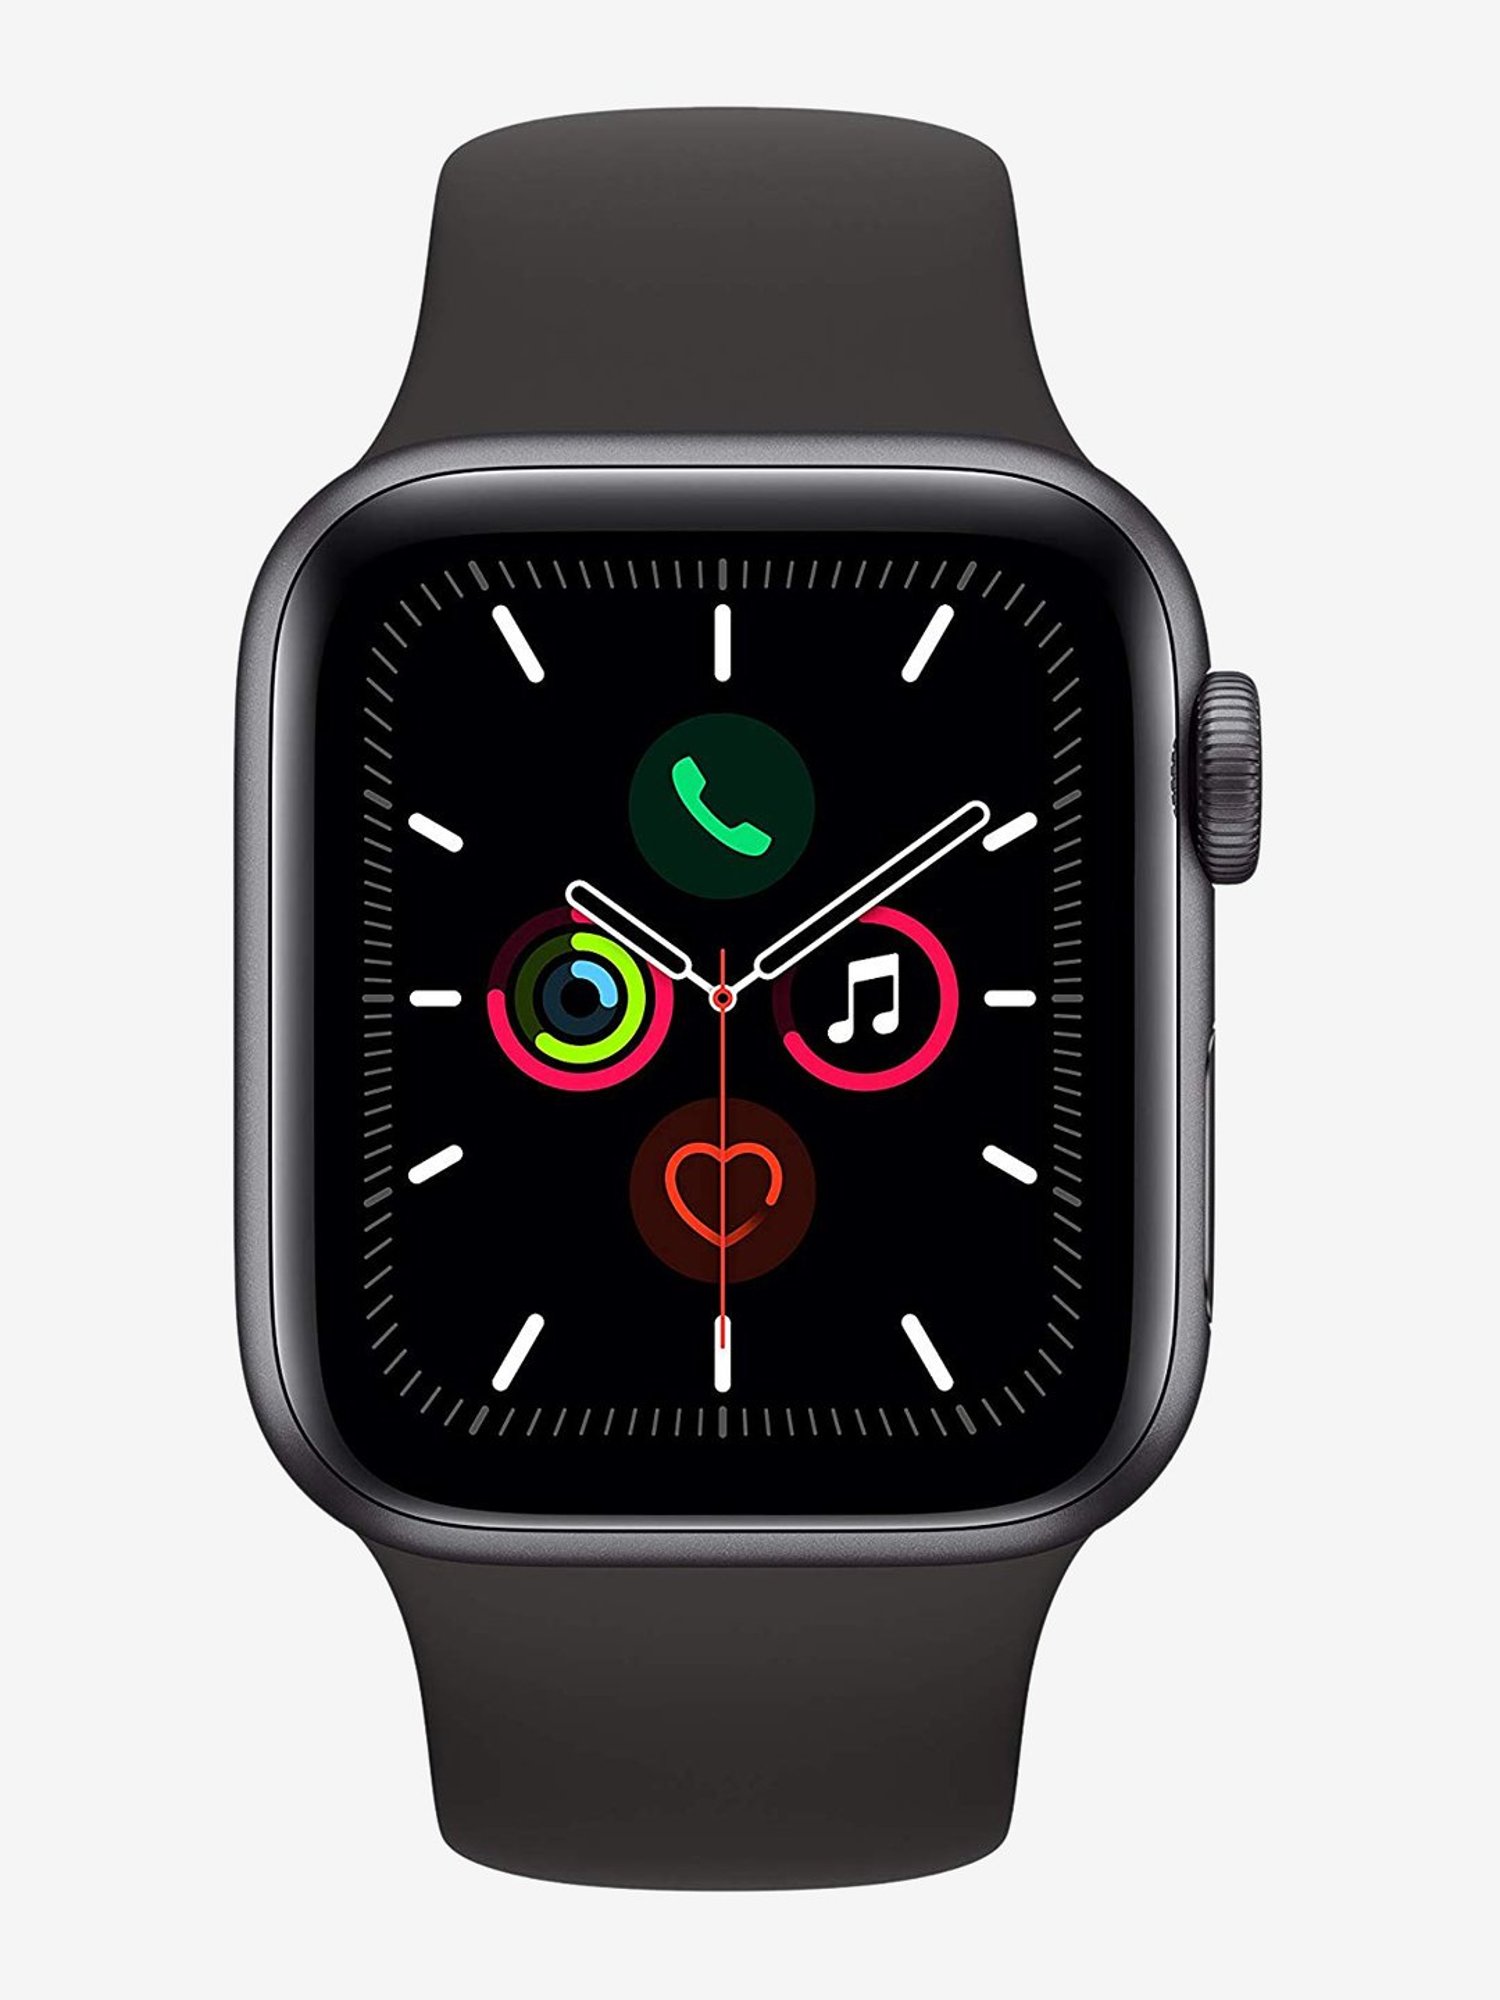 Apple Watch Series 5 Mwx32hn A Gps Cellular 40mm Space Grey Aluminum Case With Black Sport Band From Apple At Best Prices On Tata Cliq